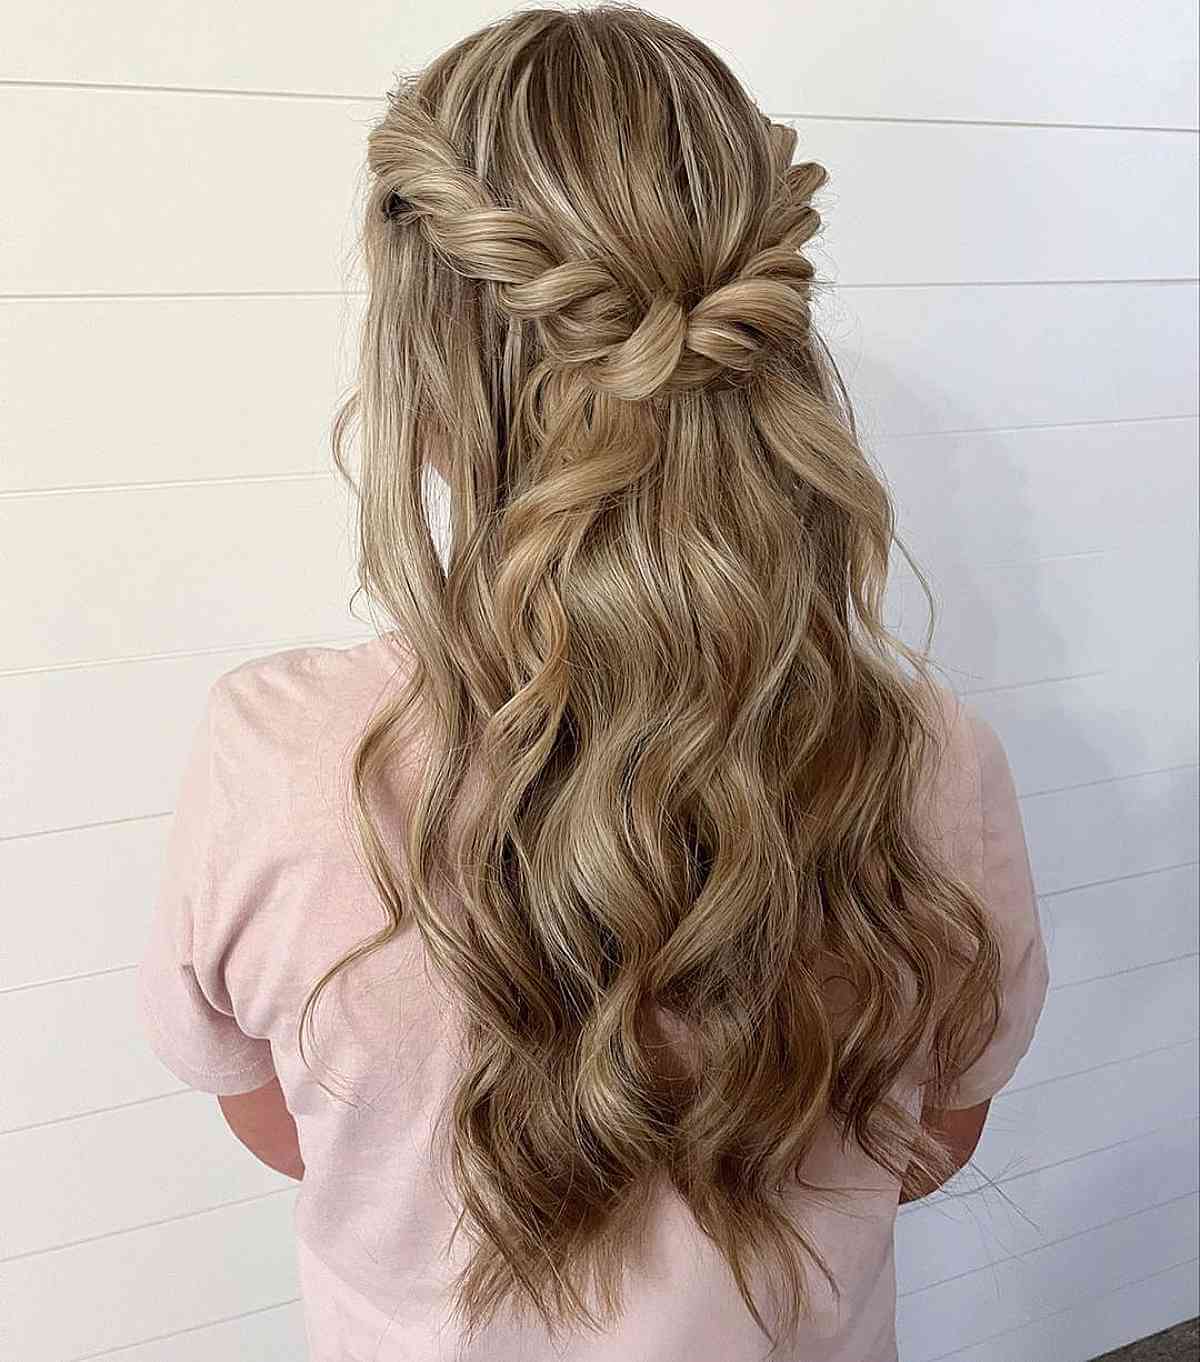 Braided Half Up | Prom Hairstyles - Cute Girls Hairstyles